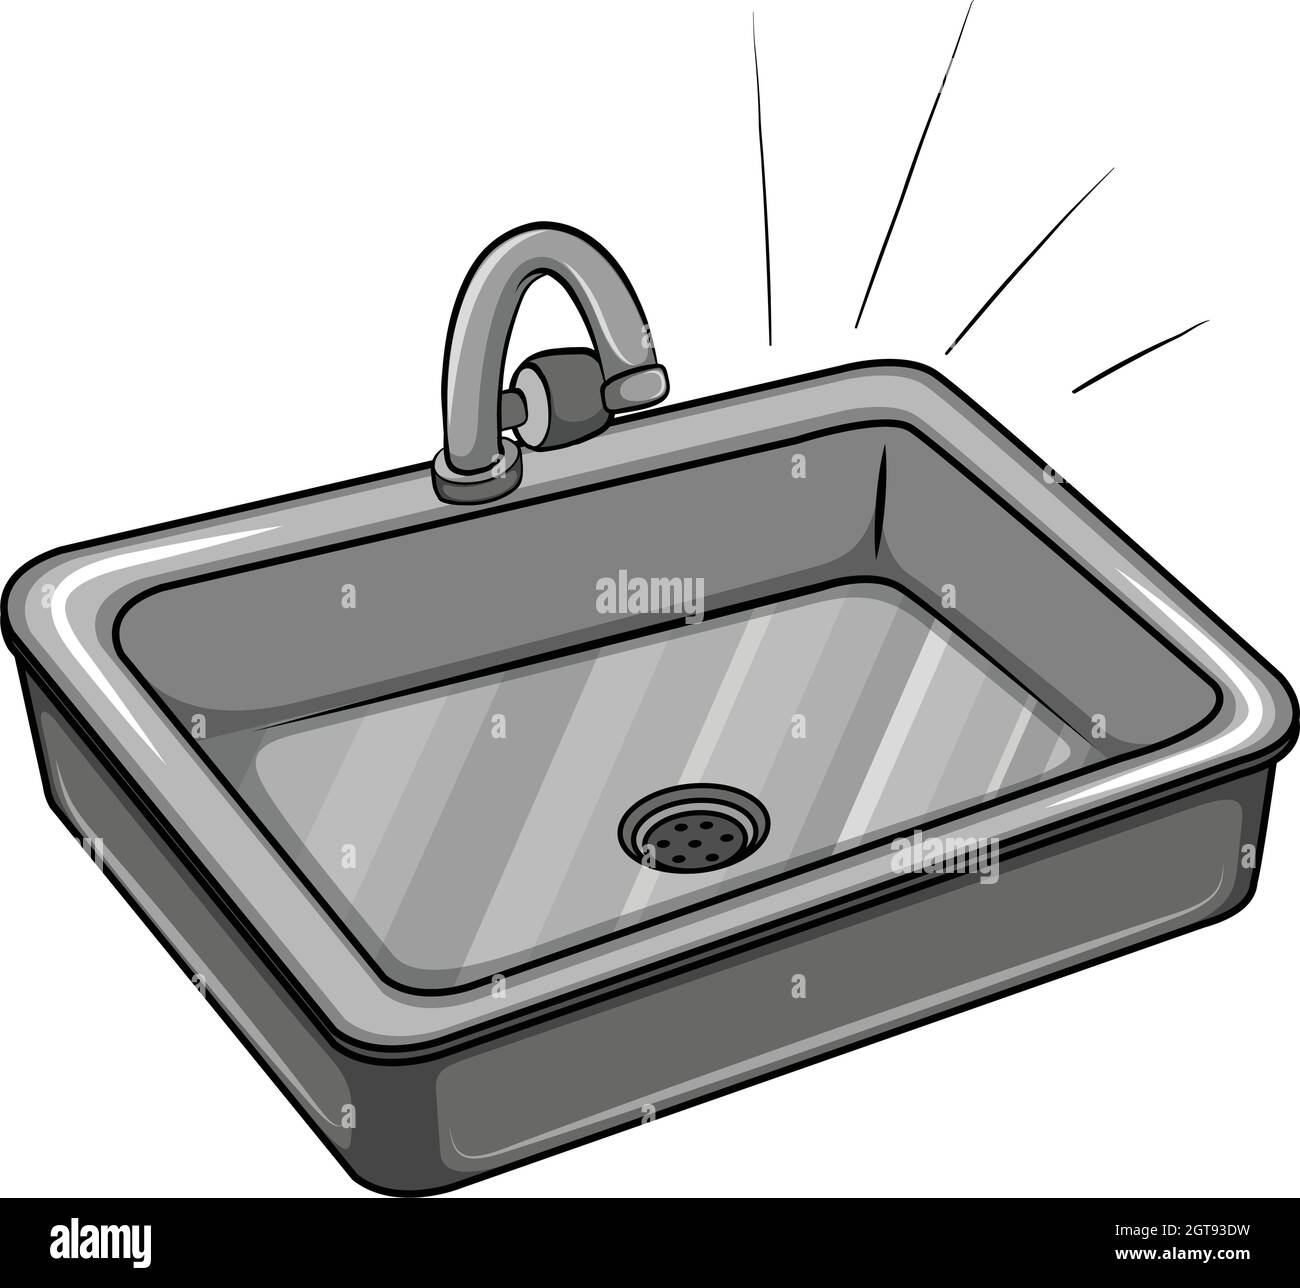 A kitchen sink Stock Vector